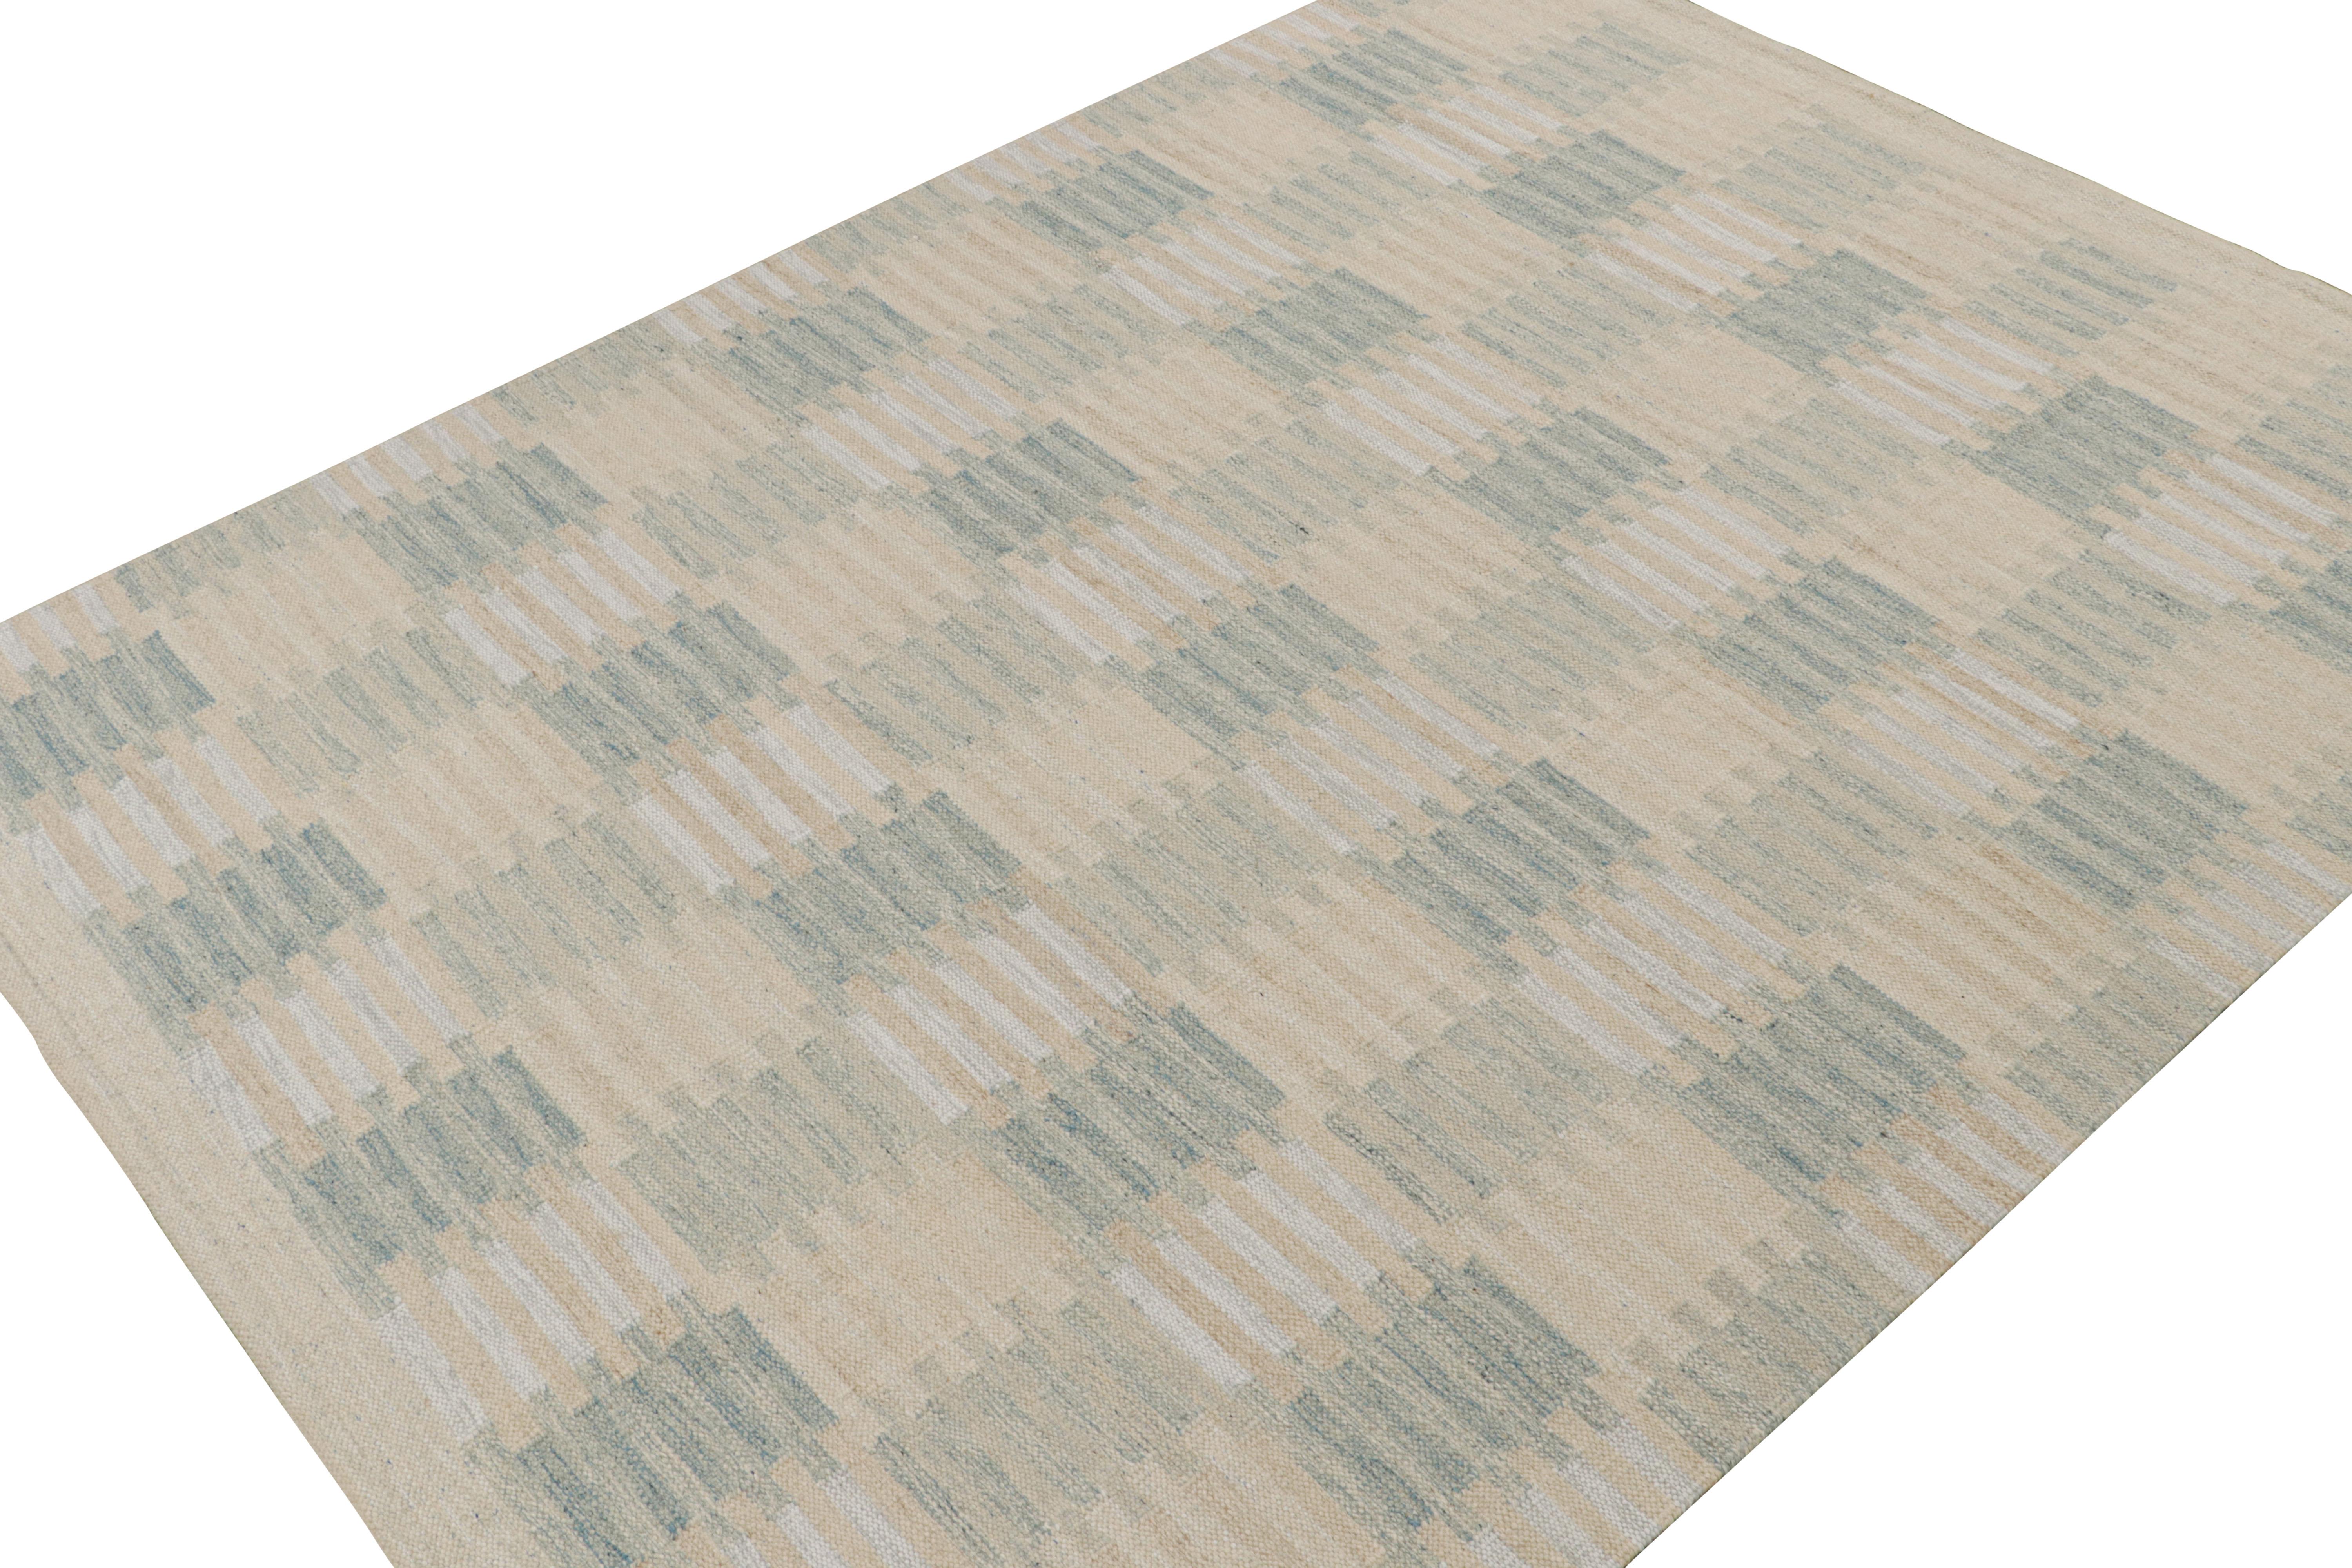 A smart 9x12 Swedish style kilim rug from our award-winning Scandinavian flat weave collection. Handwoven in wool, cotton & undyed natural yarn.

On the Design: 

This rug enjoys geometric patterns in blue & beige. Keen eyes will admire undyed,